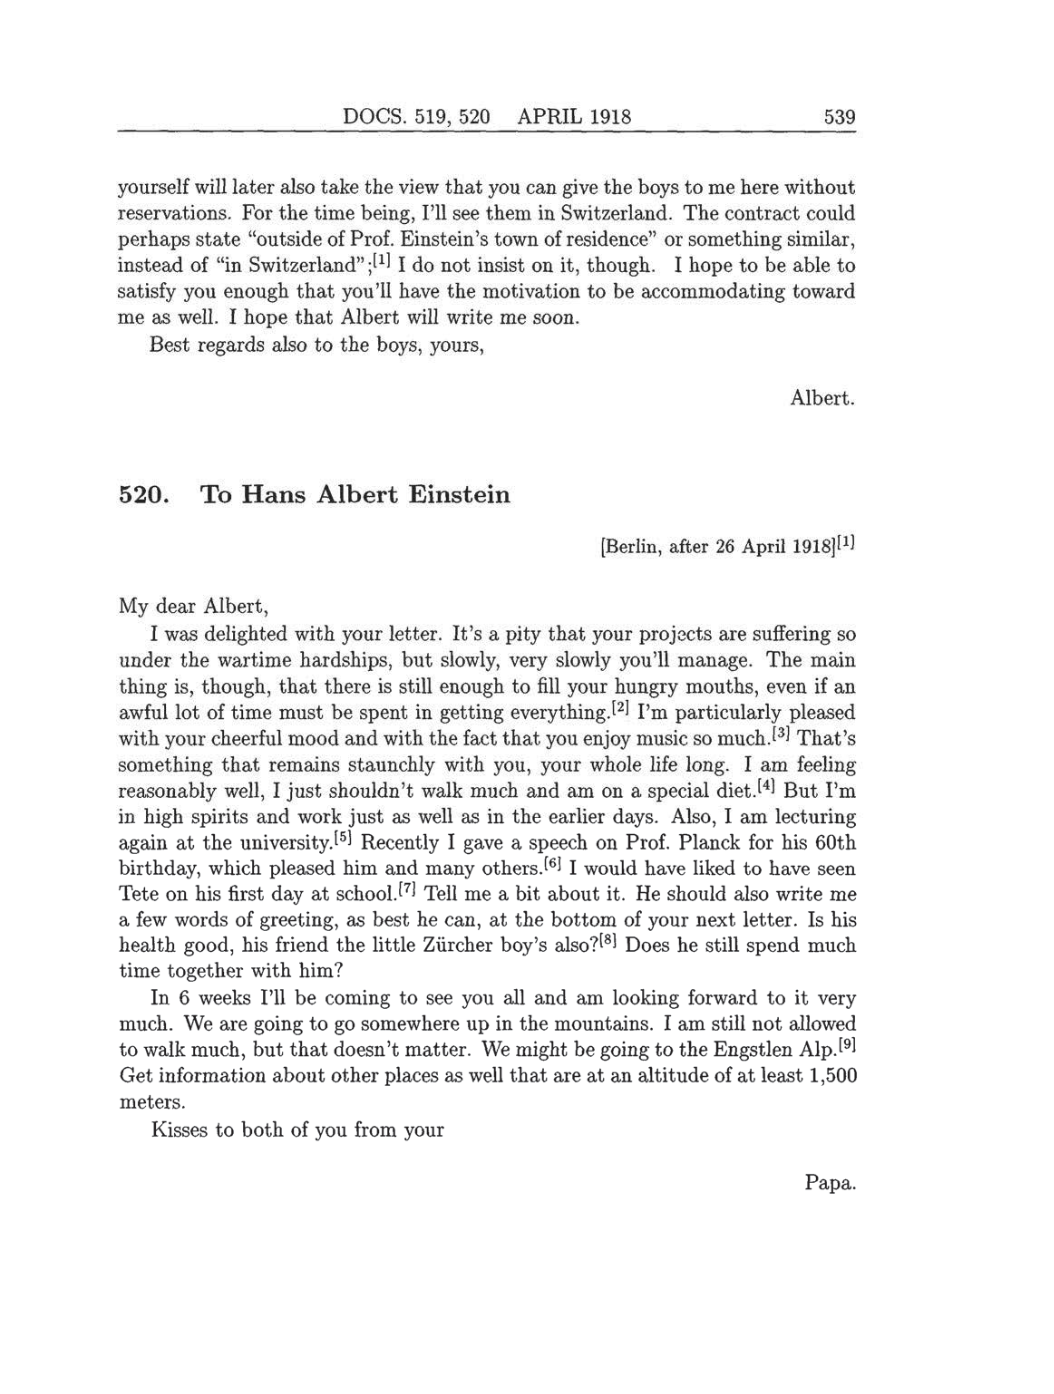 Volume 8: The Berlin Years: Correspondence, 1914-1918 (English translation supplement) page 539